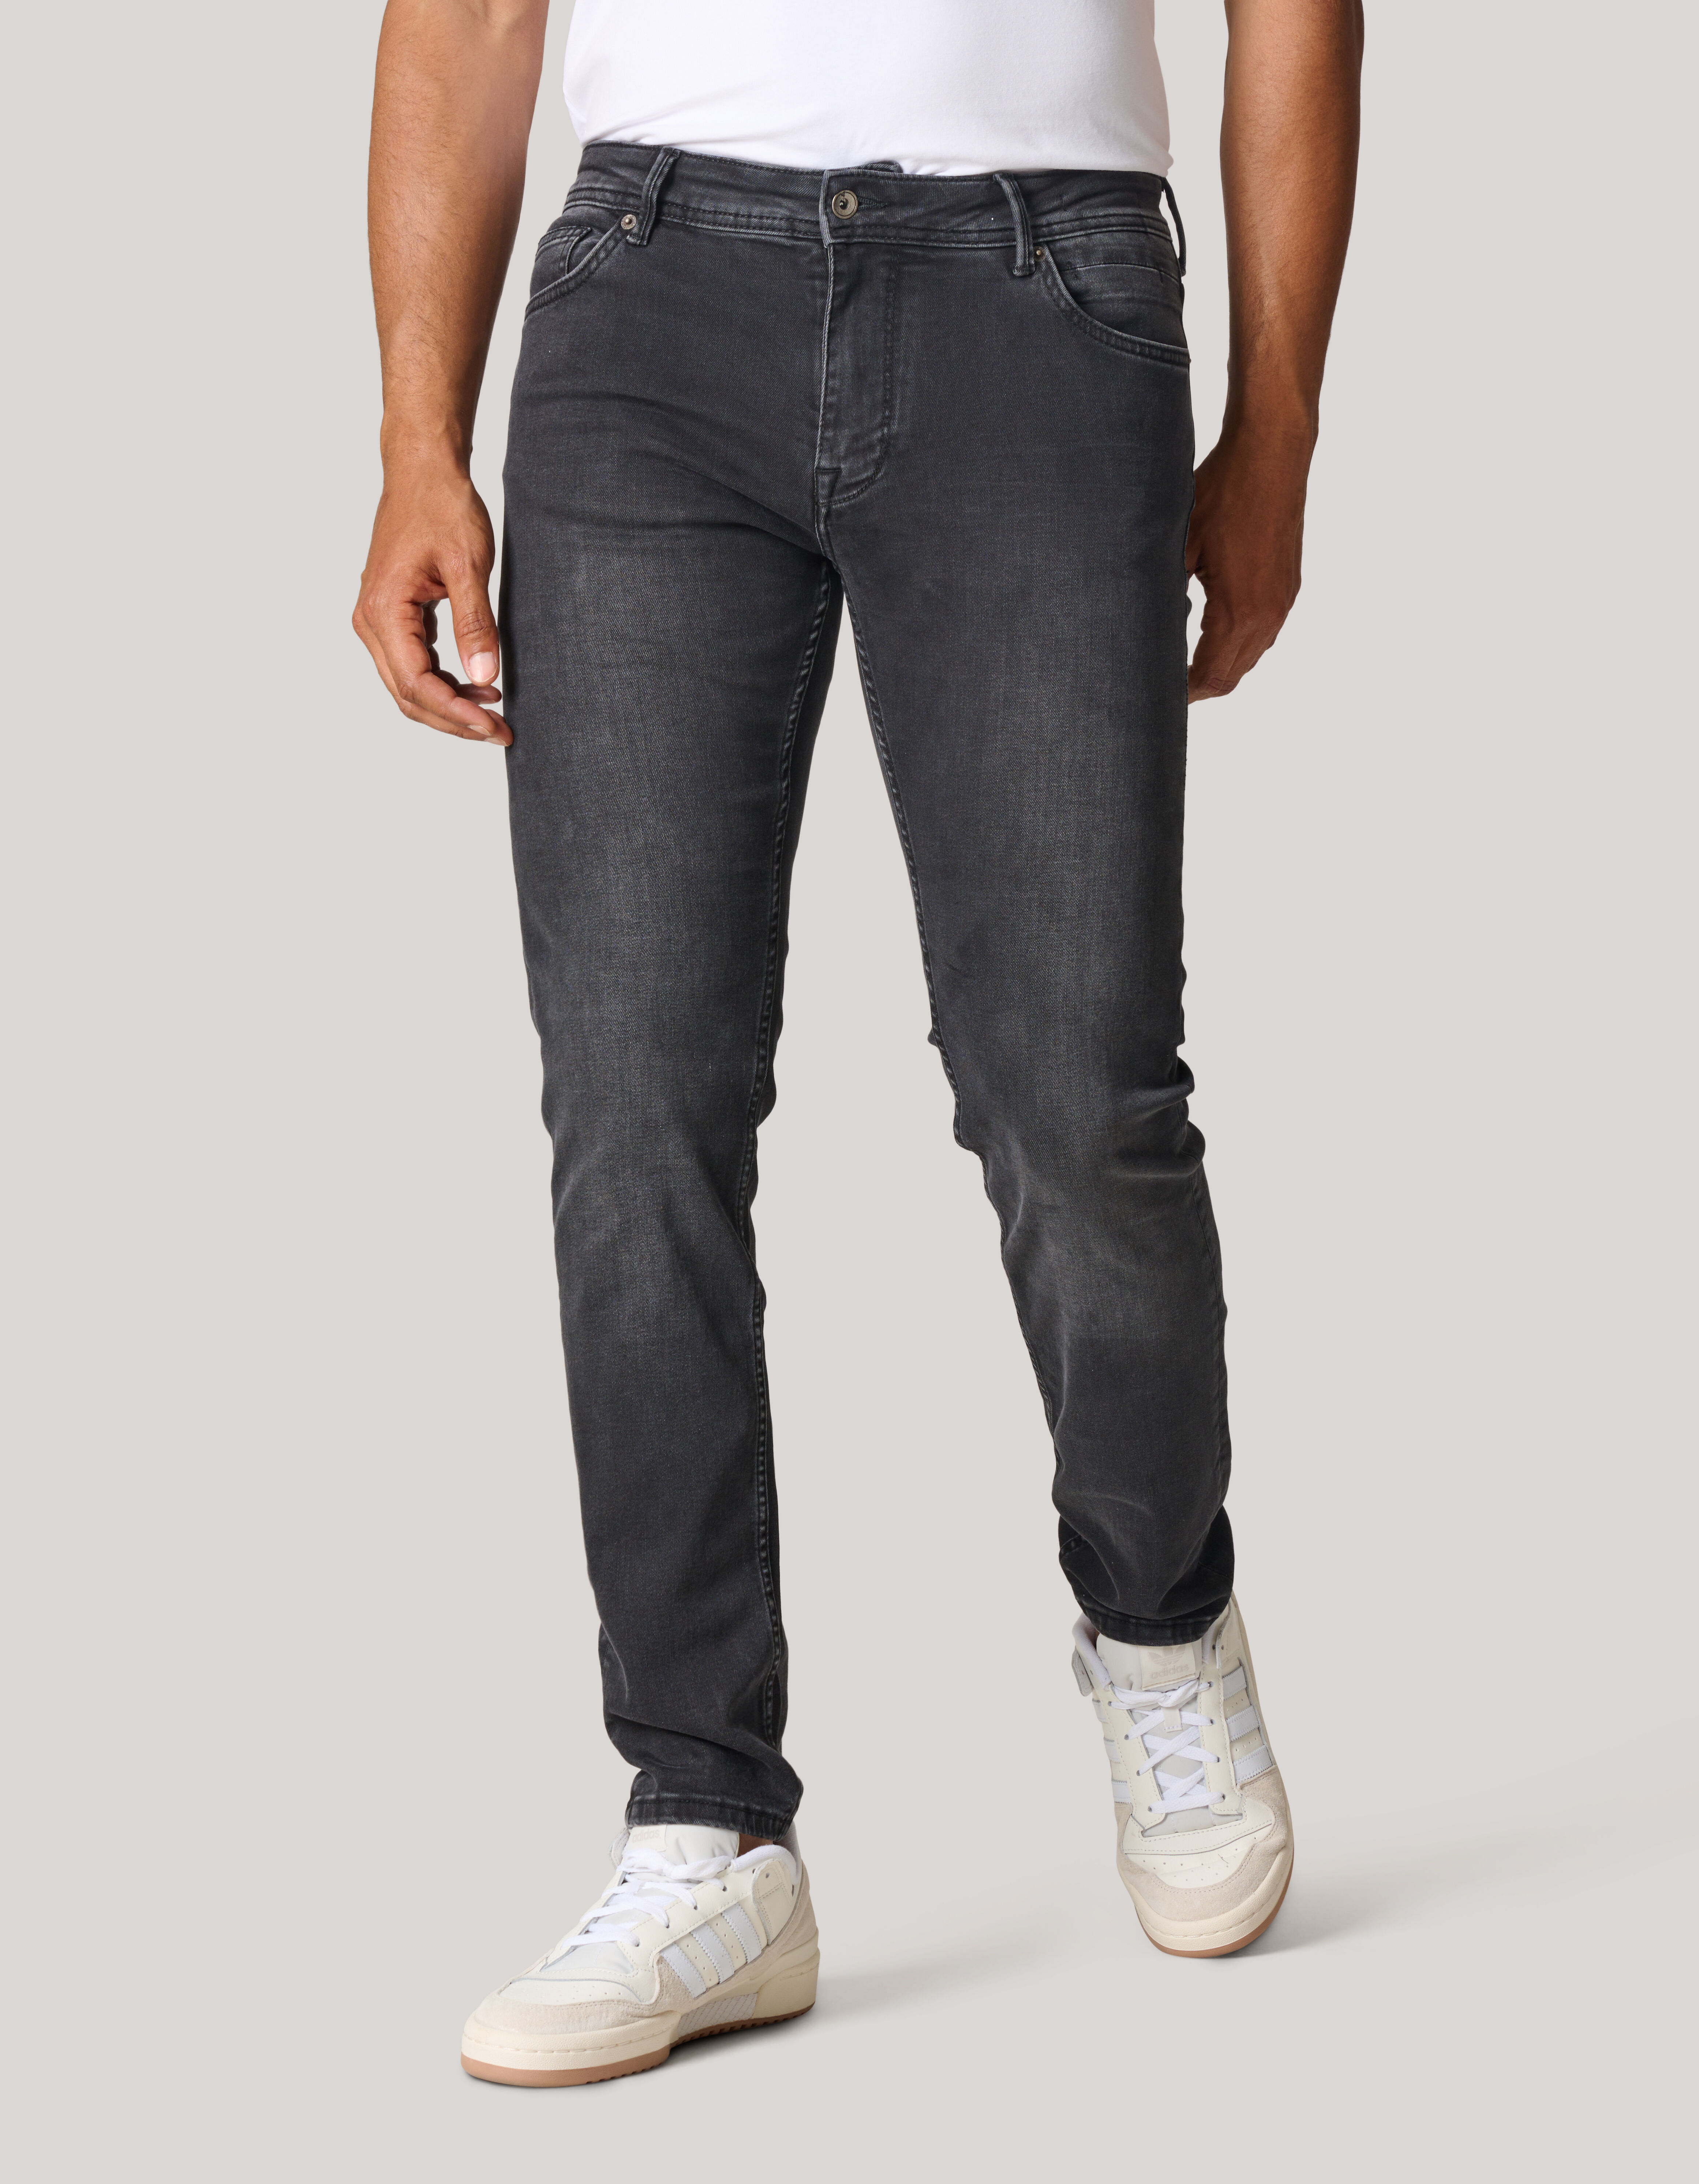 Skinny Fit Jeans Zwart Washed L32 Refill